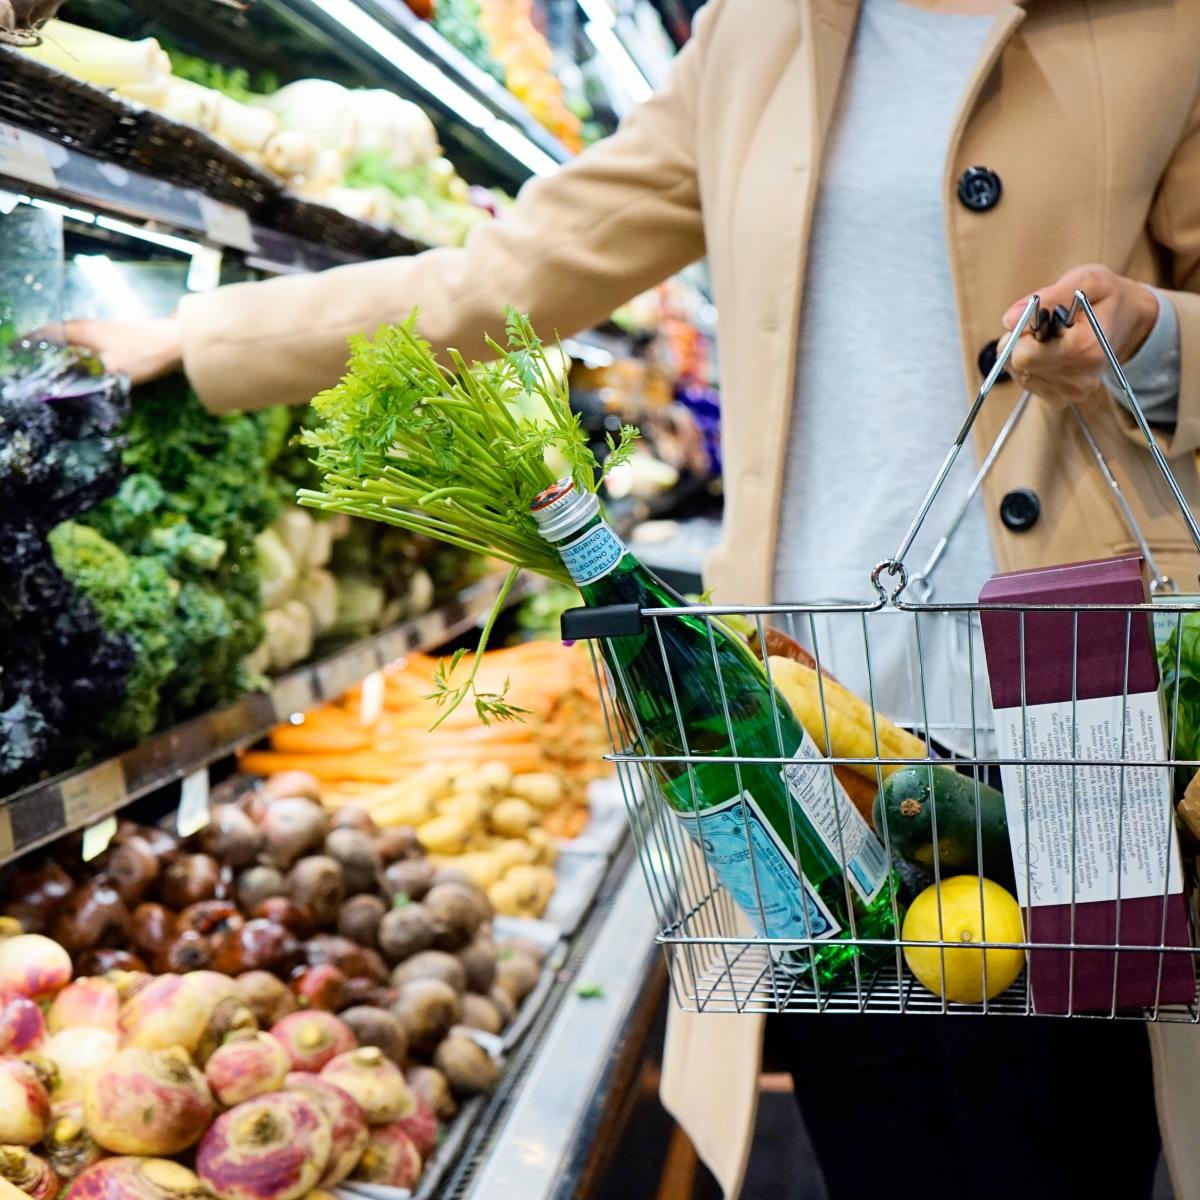 8 Strategies to Save Money on Groceries